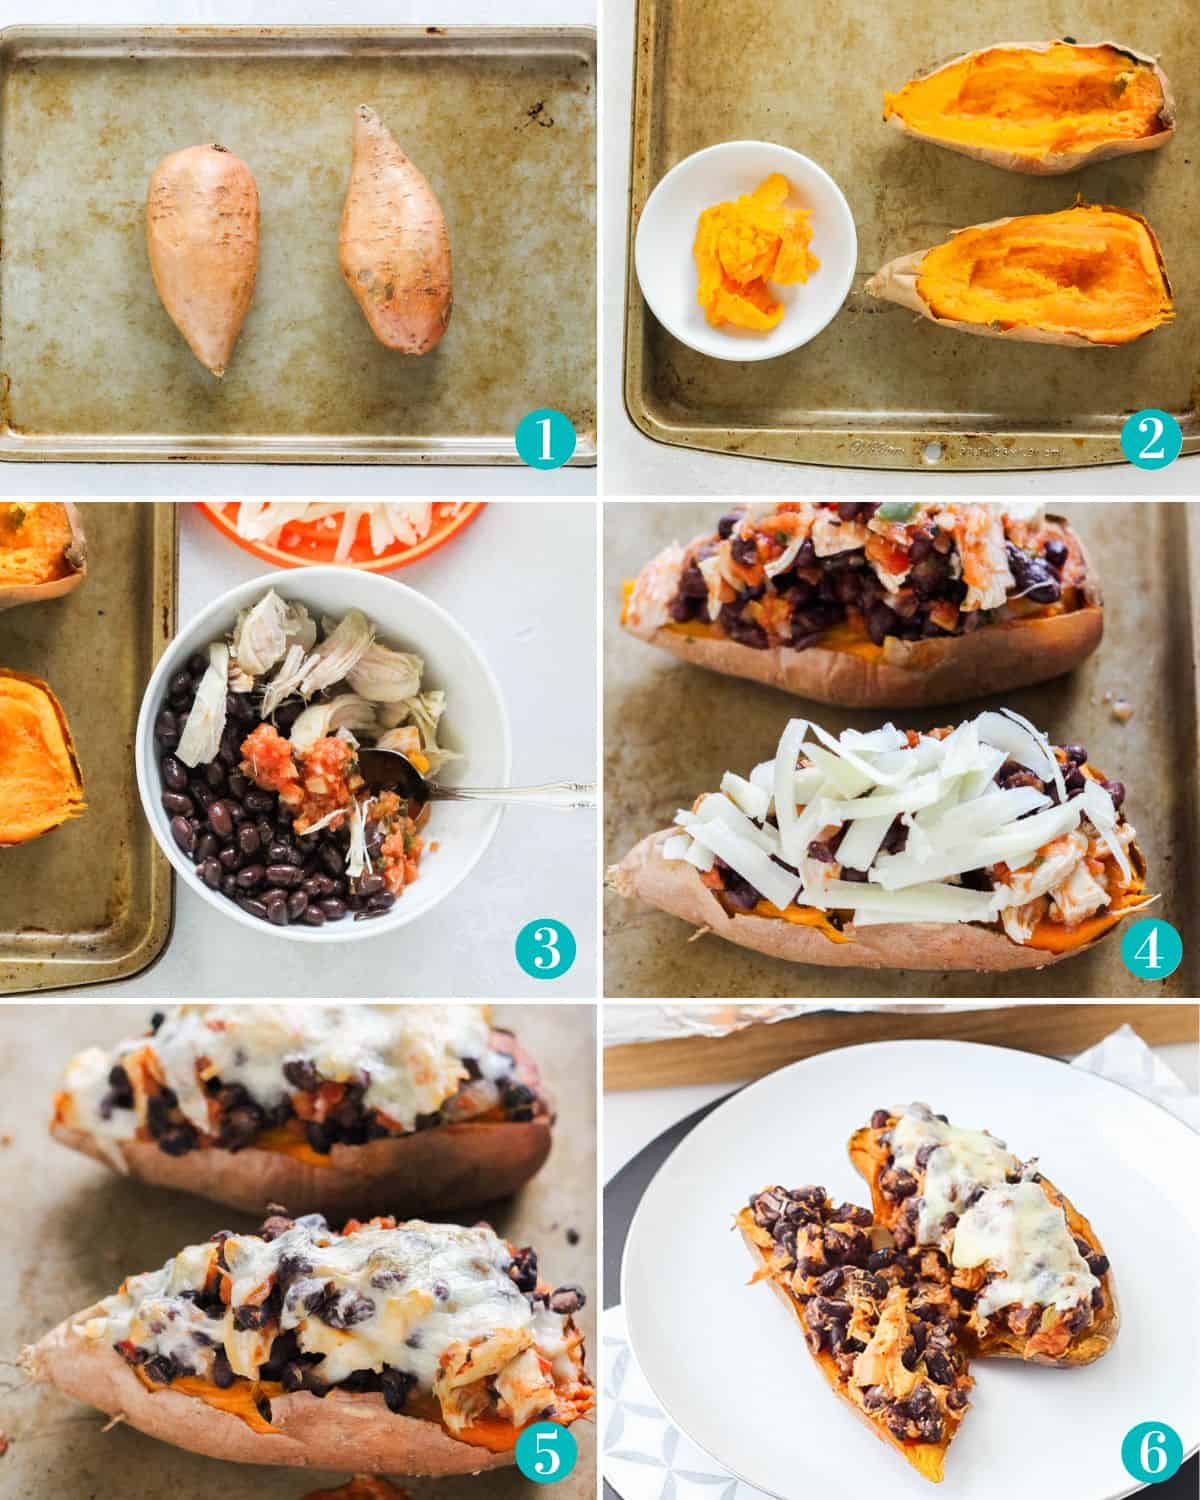 six photo collage with sweet potatoes on baking sheet, sweet potato halved, chicken and beans stirred together with salsa, stuffed sweet potato with cheese on baking sheet before baking, sweet potato after baking, and baked stuffed sweet potato on plate.